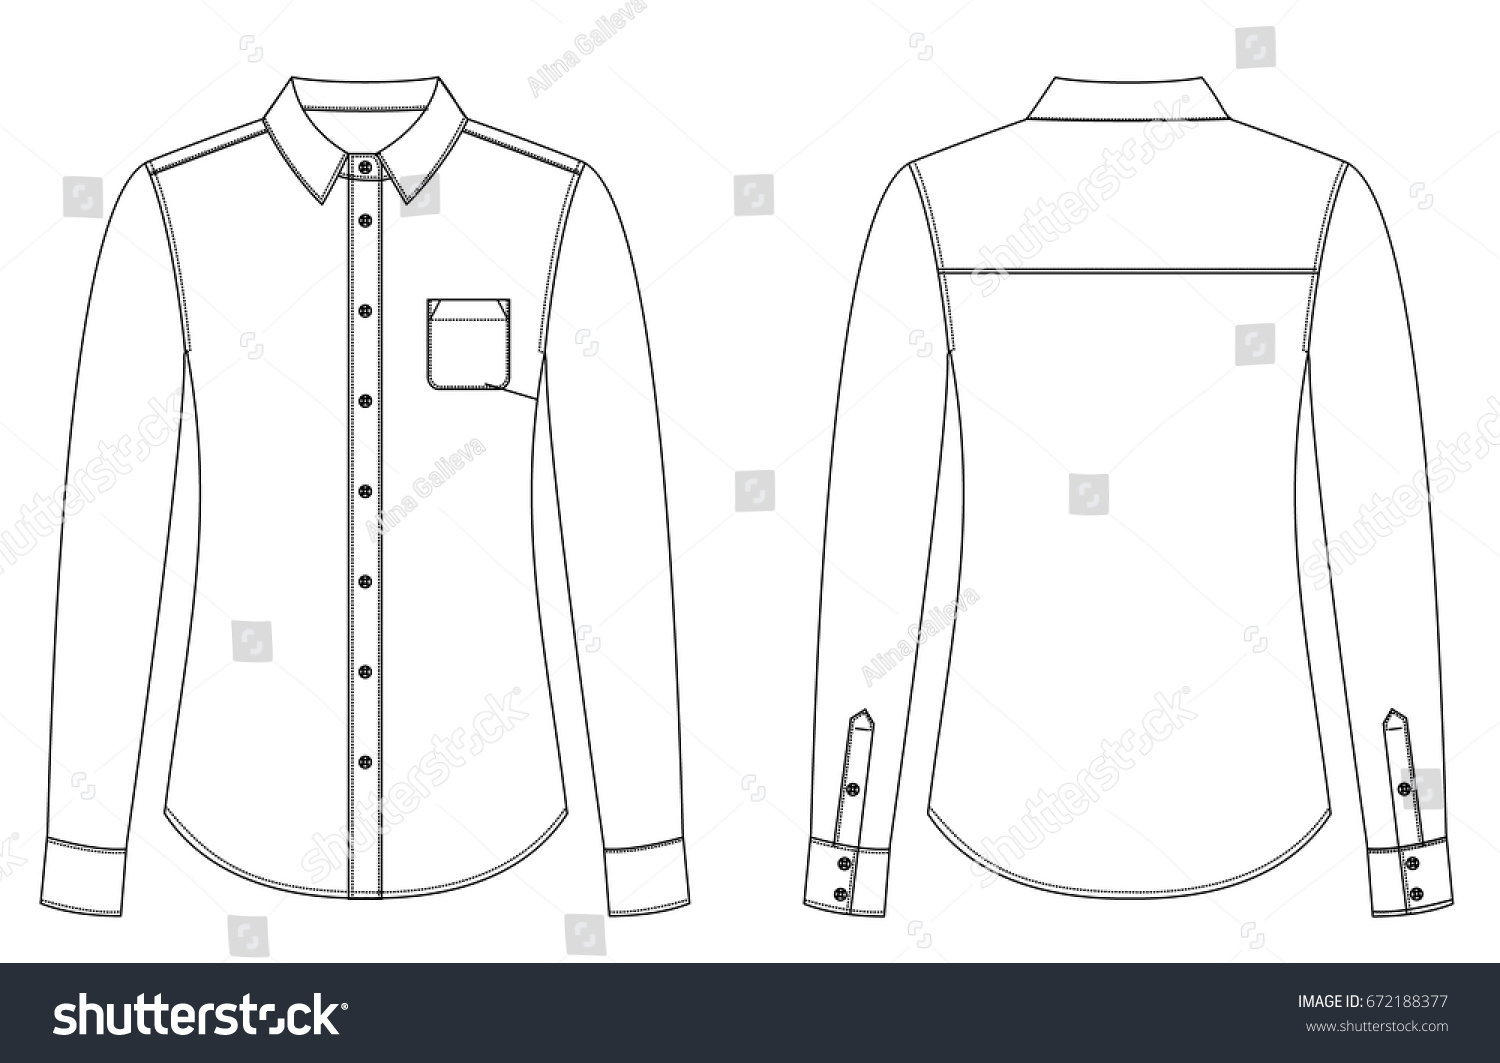 Female Tshirt Technical Sketch Front Back Stock Vector 672188377 ...